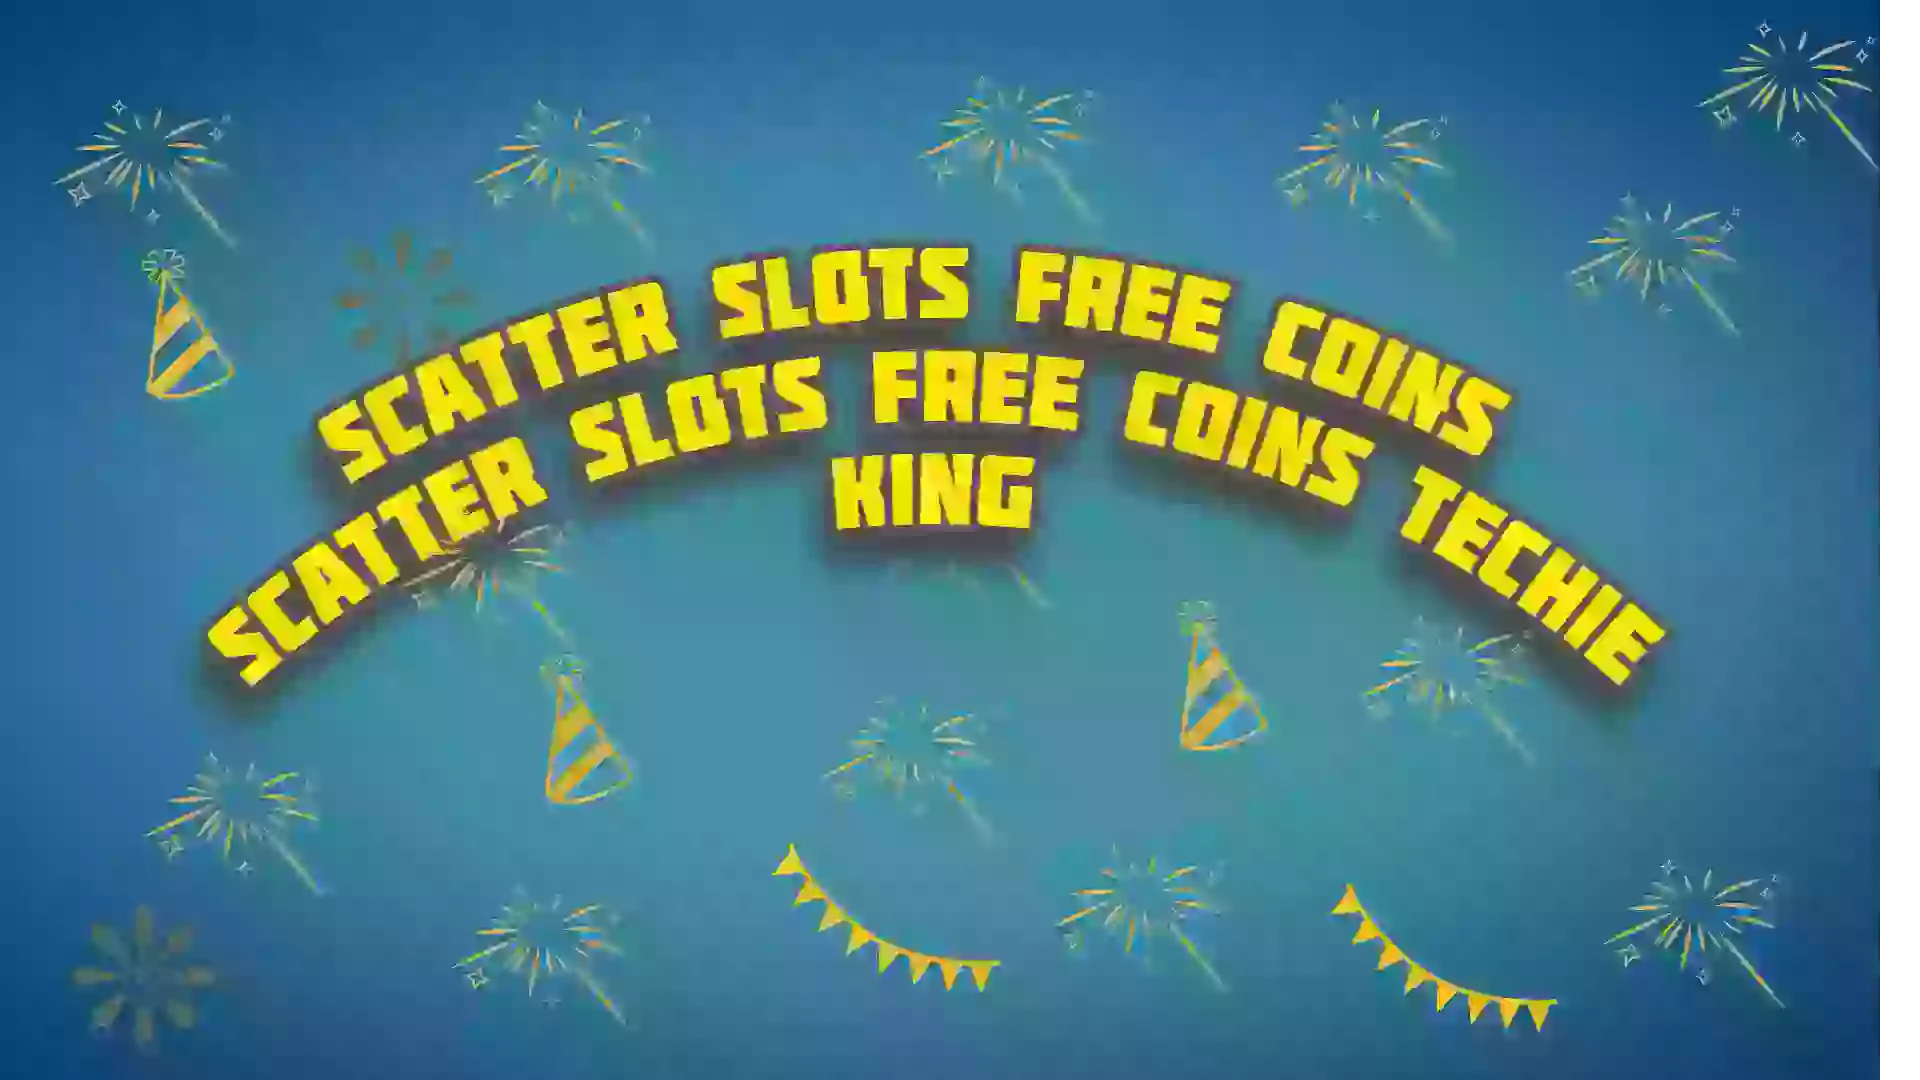 Scatter slots free coins